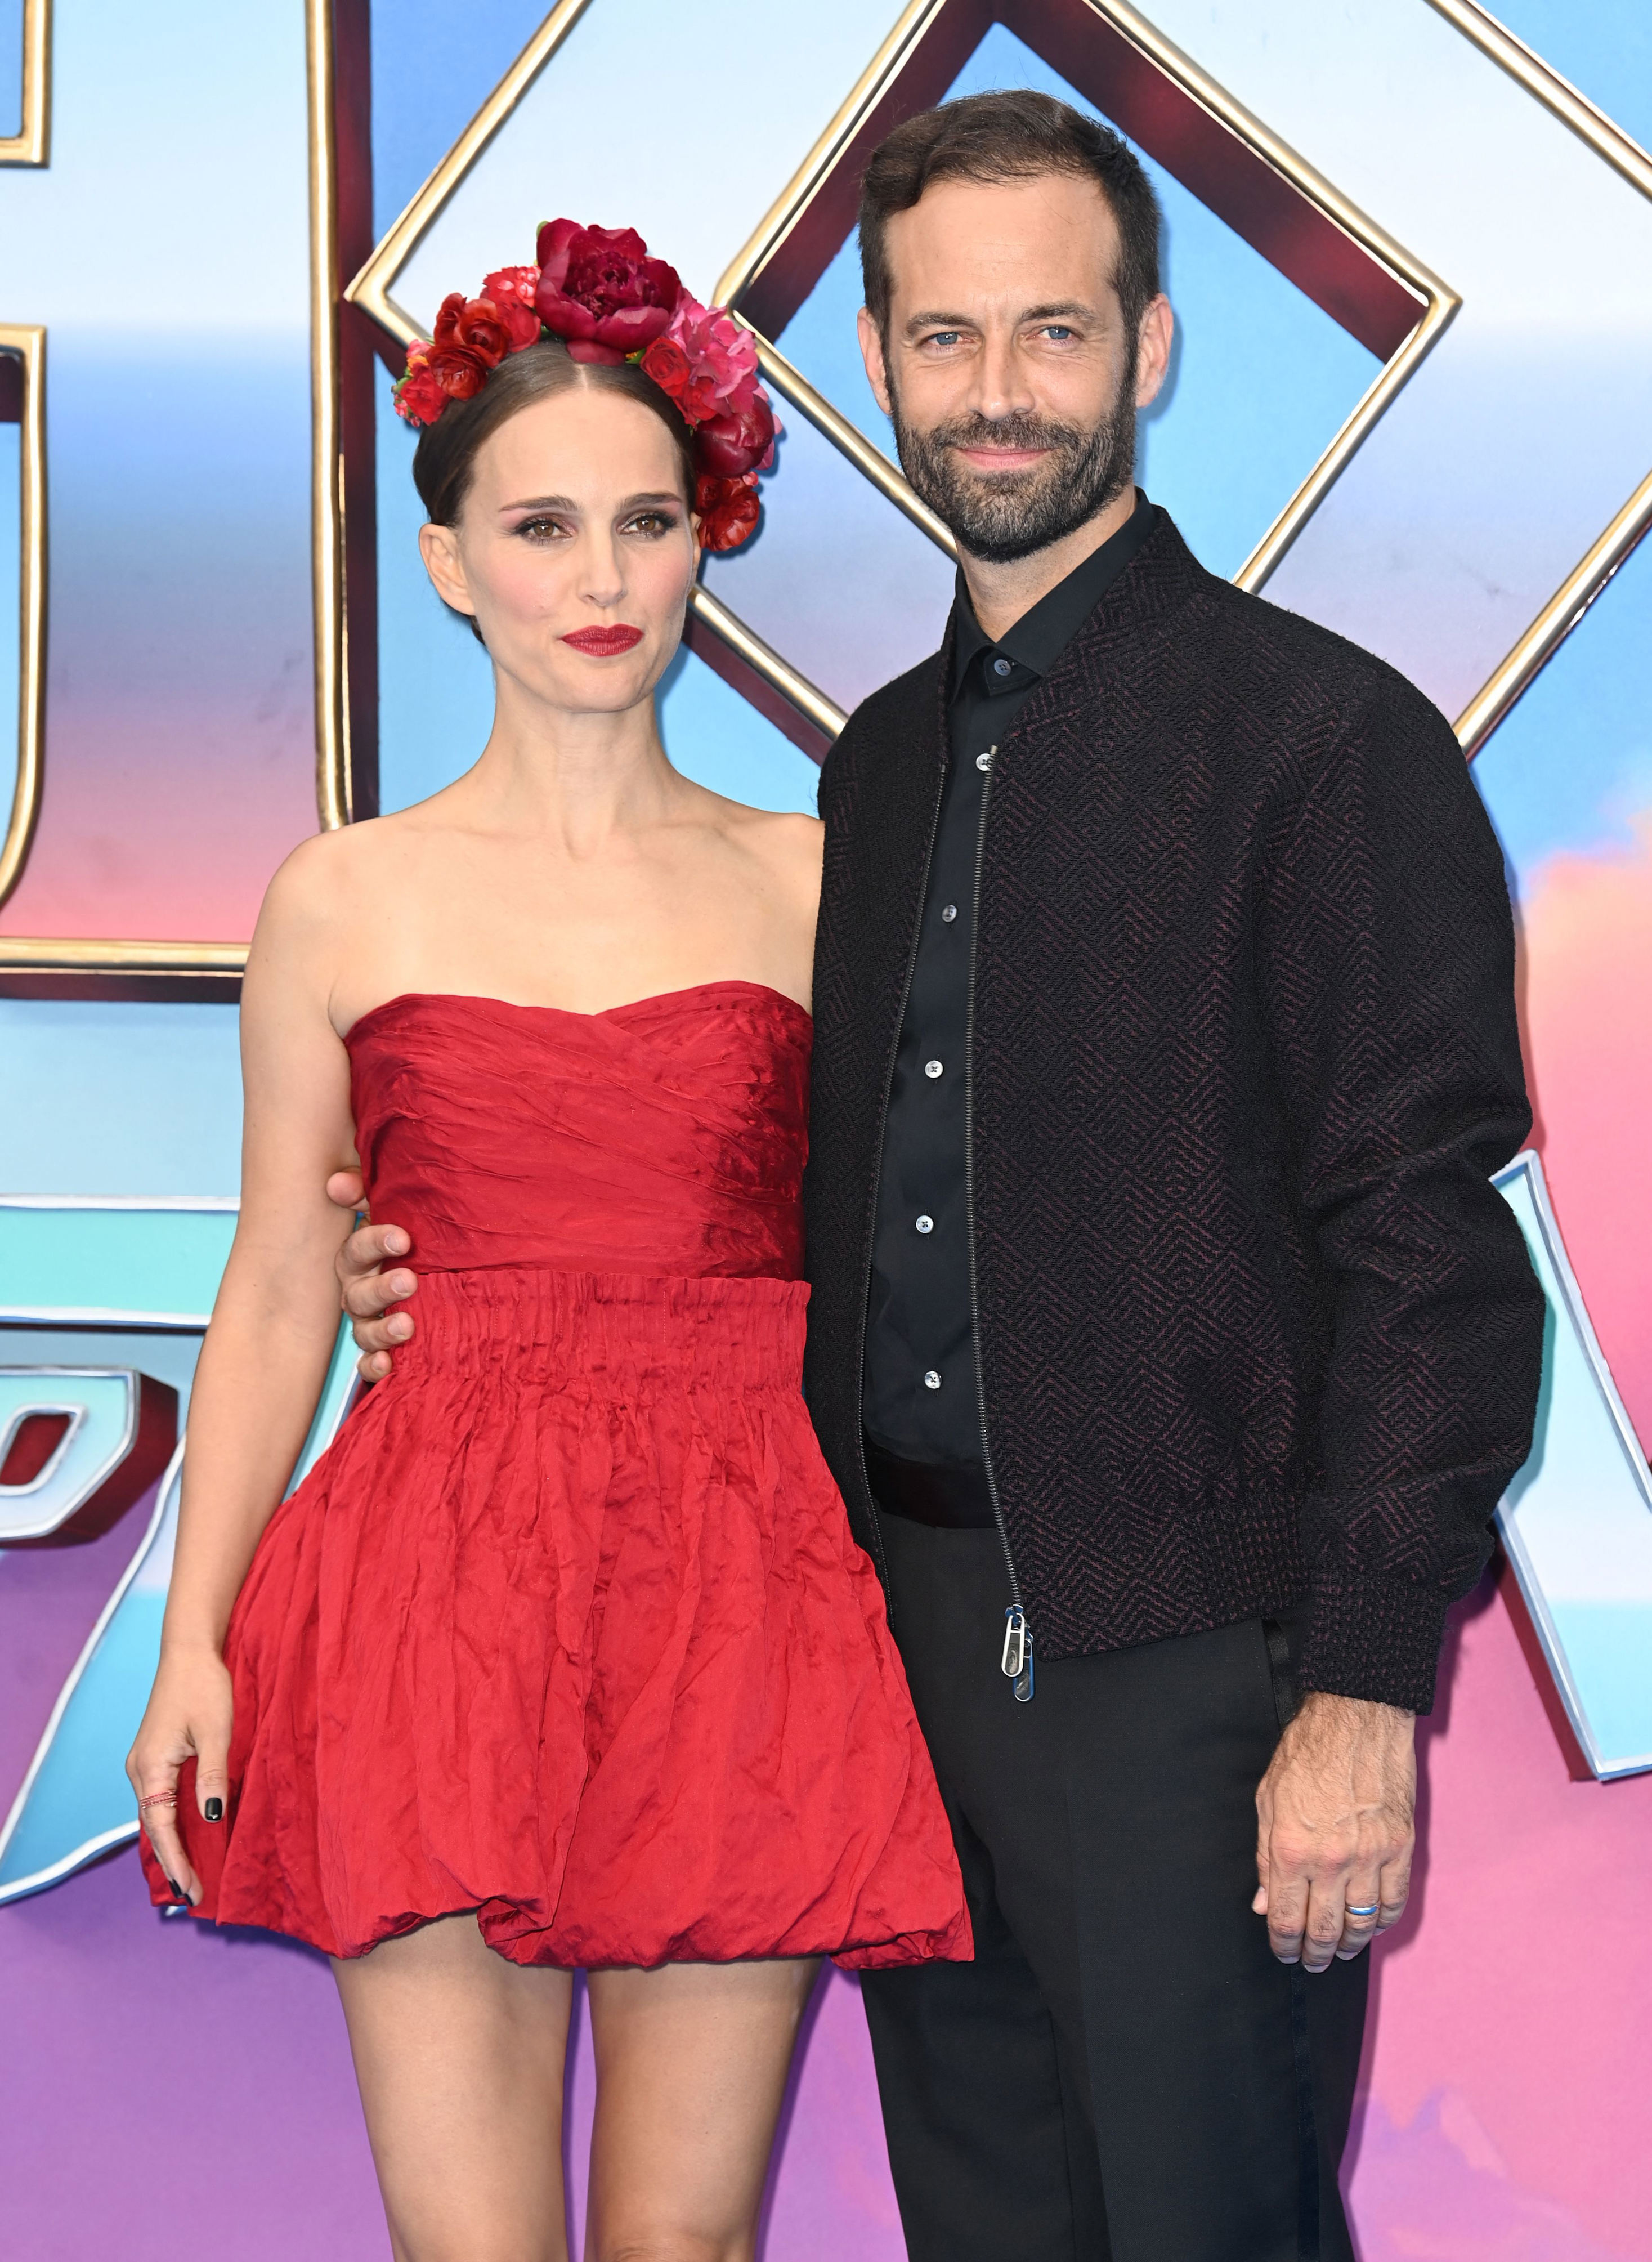 <p><span><a href="https://www.wonderwall.com/celebrity/profiles/overview/natalie-portman-361.article">Natalie Portman</a>'s marriage reportedly crumbled after her husband, Benjamin Millepied, allegedly had an affair with a 25-year-old woman. On June 2, 2023, </span><a href="https://pagesix.com/2023/06/02/natalie-portman-ben-millepied-fight-for-marriage-amid-affair/">Page Six</a><span> reported that the Oscar winner and the dancer-choreographer, who married in 2012, quietly separated in 2022 but worked through their issues until they were later "rocked by revelations that he cheated." </span></p><p><span>In May 2023 -- the same month Natalie attended the </span><a href="https://www.wonderwall.com/celebrity/cannes-film-festival-2023-738818.gallery">Cannes Film Festival</a><span> without her husband -- Benjamin was photographed with climate activist Camille Étienne in Paris. According to French magazine </span><a href="https://www.voici.fr/news-people/natalie-portman-trahie-par-benjamin-millepied-qui-est-camille-etienne-la-femme-pour-qui-il-a-craque-758105#photo-2">Voici</a><span>, the "Star Wars" actress learned in early March "that her husband was having an affair with a young woman." </span></p><p><span>Benjamin allegedly wanted to work things out with his wife. "Ben is doing everything he can to get Natalie to forgive him. He loves her and their family," a source told Page Six.</span> However, by August, <a href="https://www.usmagazine.com/celebrity-news/news/natalie-portman-and-benjamin-millepied-are-separated-after-affair/">Us Weekly</a> was reporting that he and Natalie had separated again.</p><p>MORE: <a href="https://www.wonderwall.com/celebrity/johnny-depp-and-amber-heard-plus-more-celeb-couples-with-big-age-gaps-32491.gallery">Celeb couples with big age gaps</a></p>